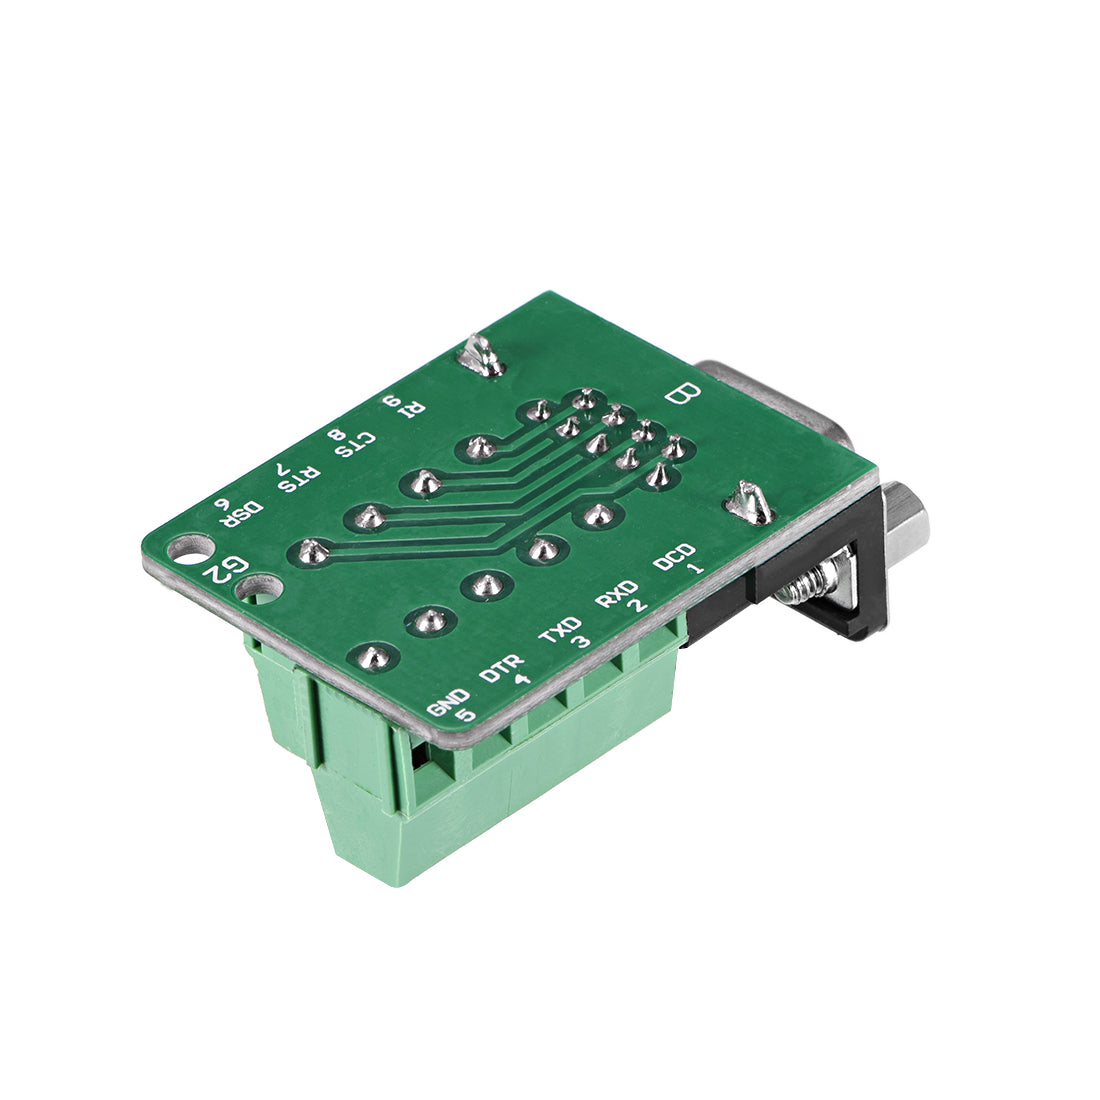 uxcell Uxcell D-sub DB9 Breakout Board Connector 9 Pin 2-row Female Port Solderless Terminal Block Adapter with Positioning Nuts